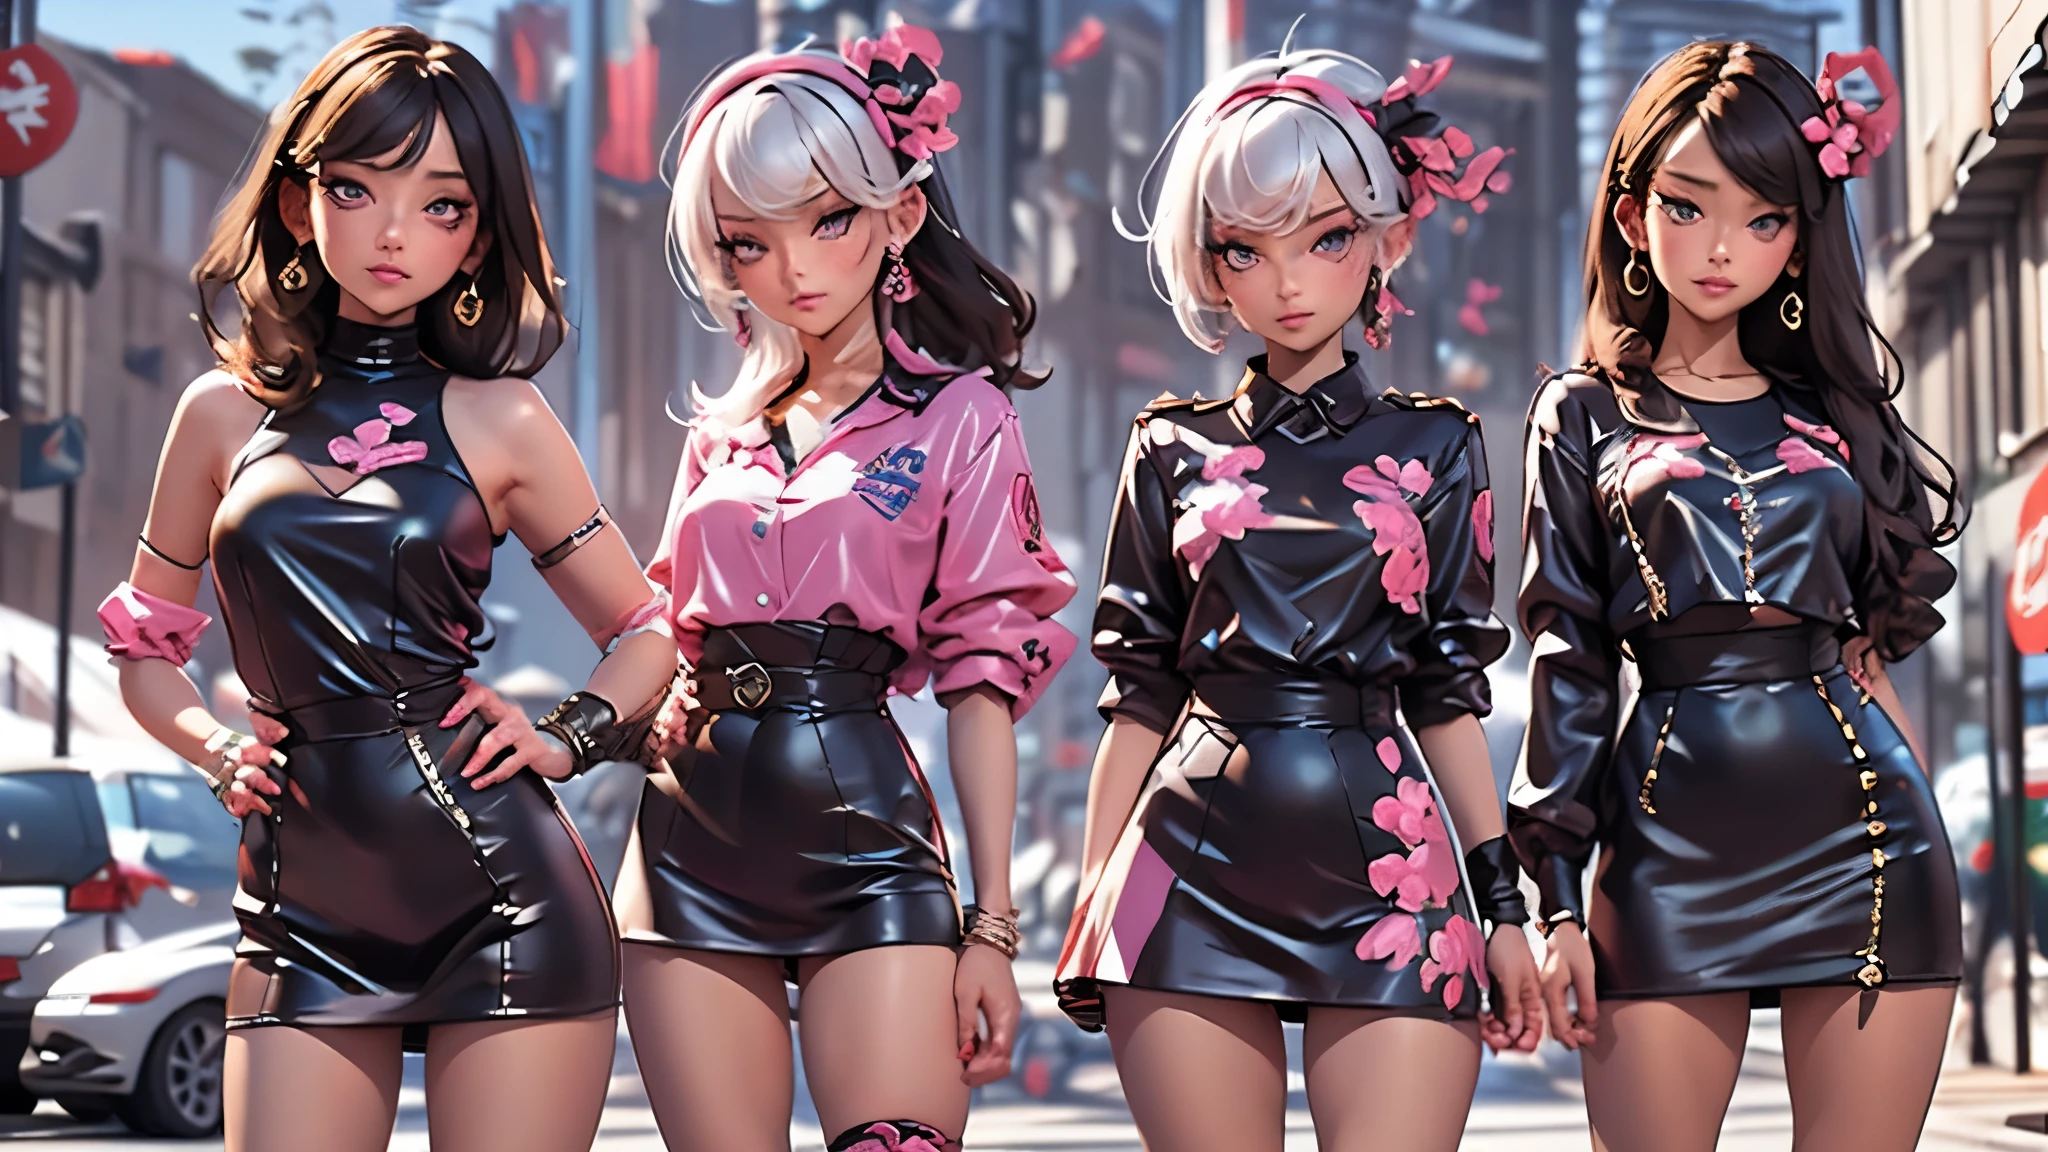 ((We have 4:1.8))、(4 sisters)、gal、(neon street)、(Four tall high school girls with model figures:1.7)、(Standing facing this), (best quality,4k,8k,highres,masterpiece:1.2),ultra-detailed,(realistic,photorealistic,photo-realistic:1.37),portraits,[close up],[women],[group],[short skirts],A close up of a group of women in short skirts, beautiful detailed eyes,beautiful detailed lips,extremely detailed faces,gorgeous makeup,stylish hairstyles,fashionable outfits,sassy poses,confident expressions,city backdrop,vibrant colors,soft lighting,colorful bokeh. ultra-high-quality. ultra detail.
